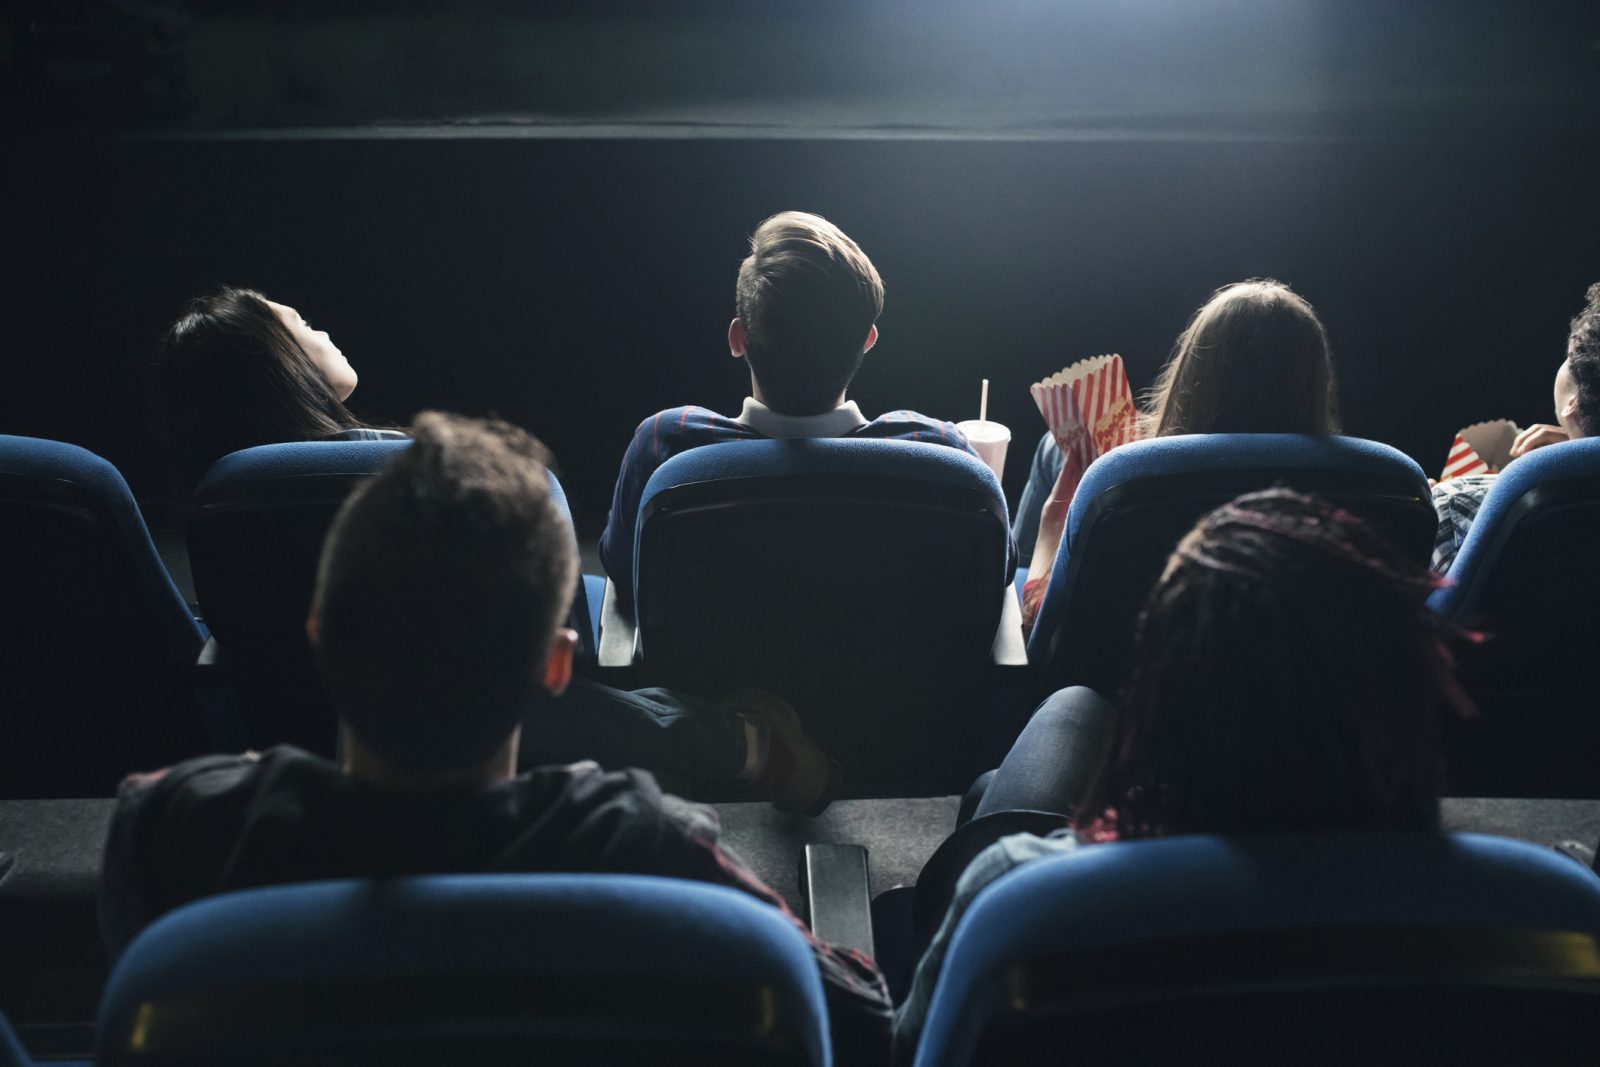 People sitting with popcorn and drinks in blue theatre seats look up at a movie screen, shown from behind.